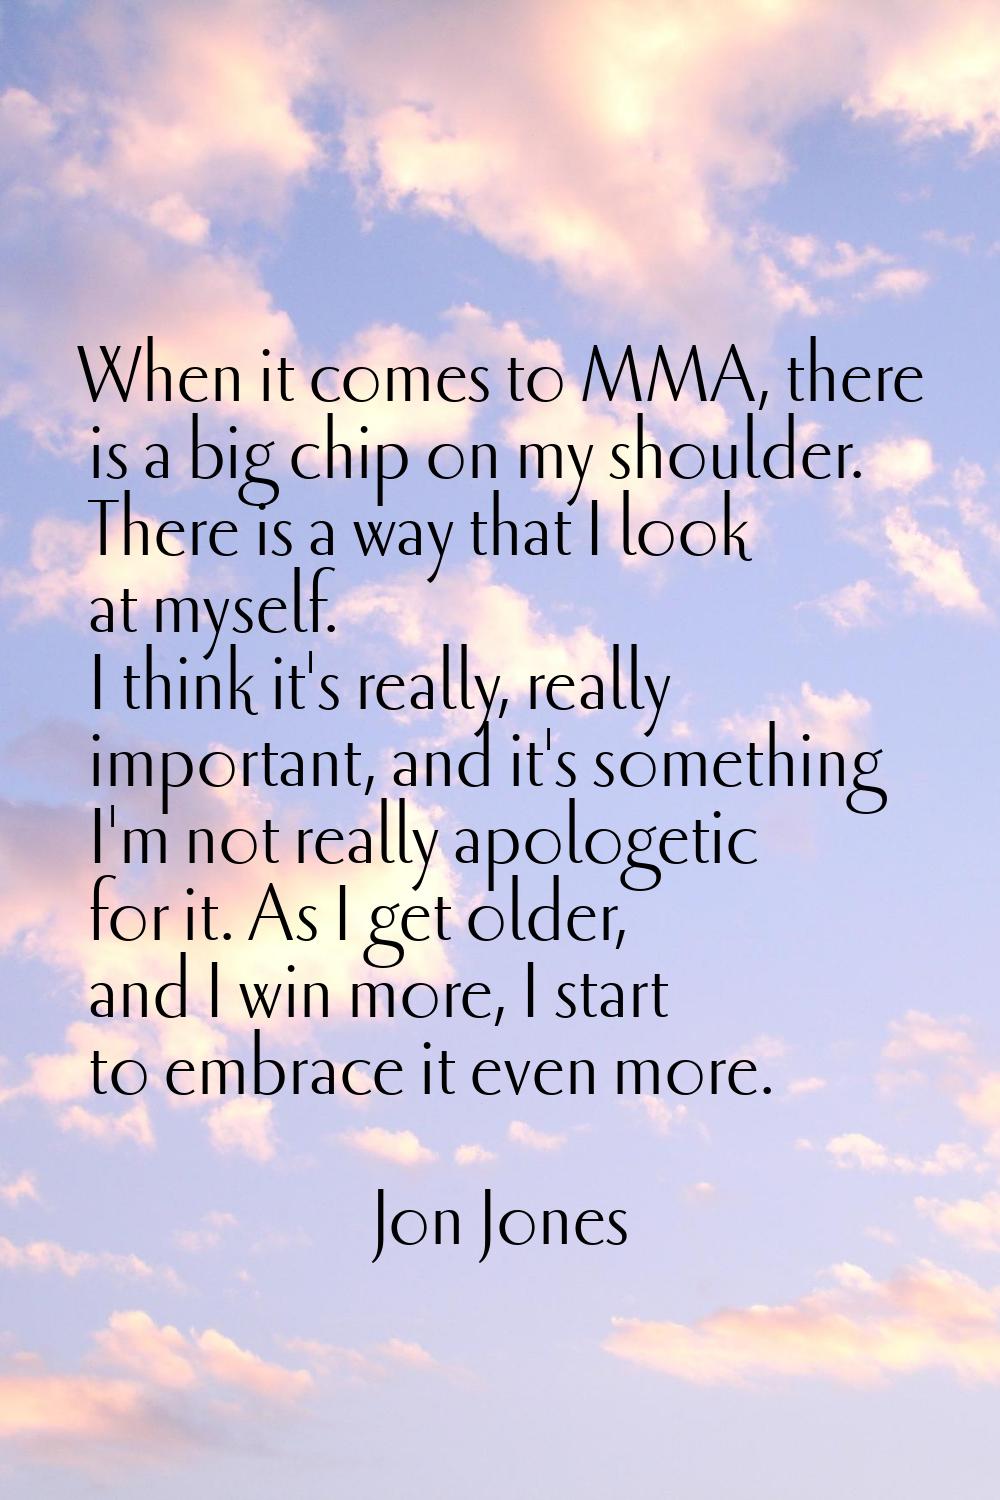 When it comes to MMA, there is a big chip on my shoulder. There is a way that I look at myself. I t